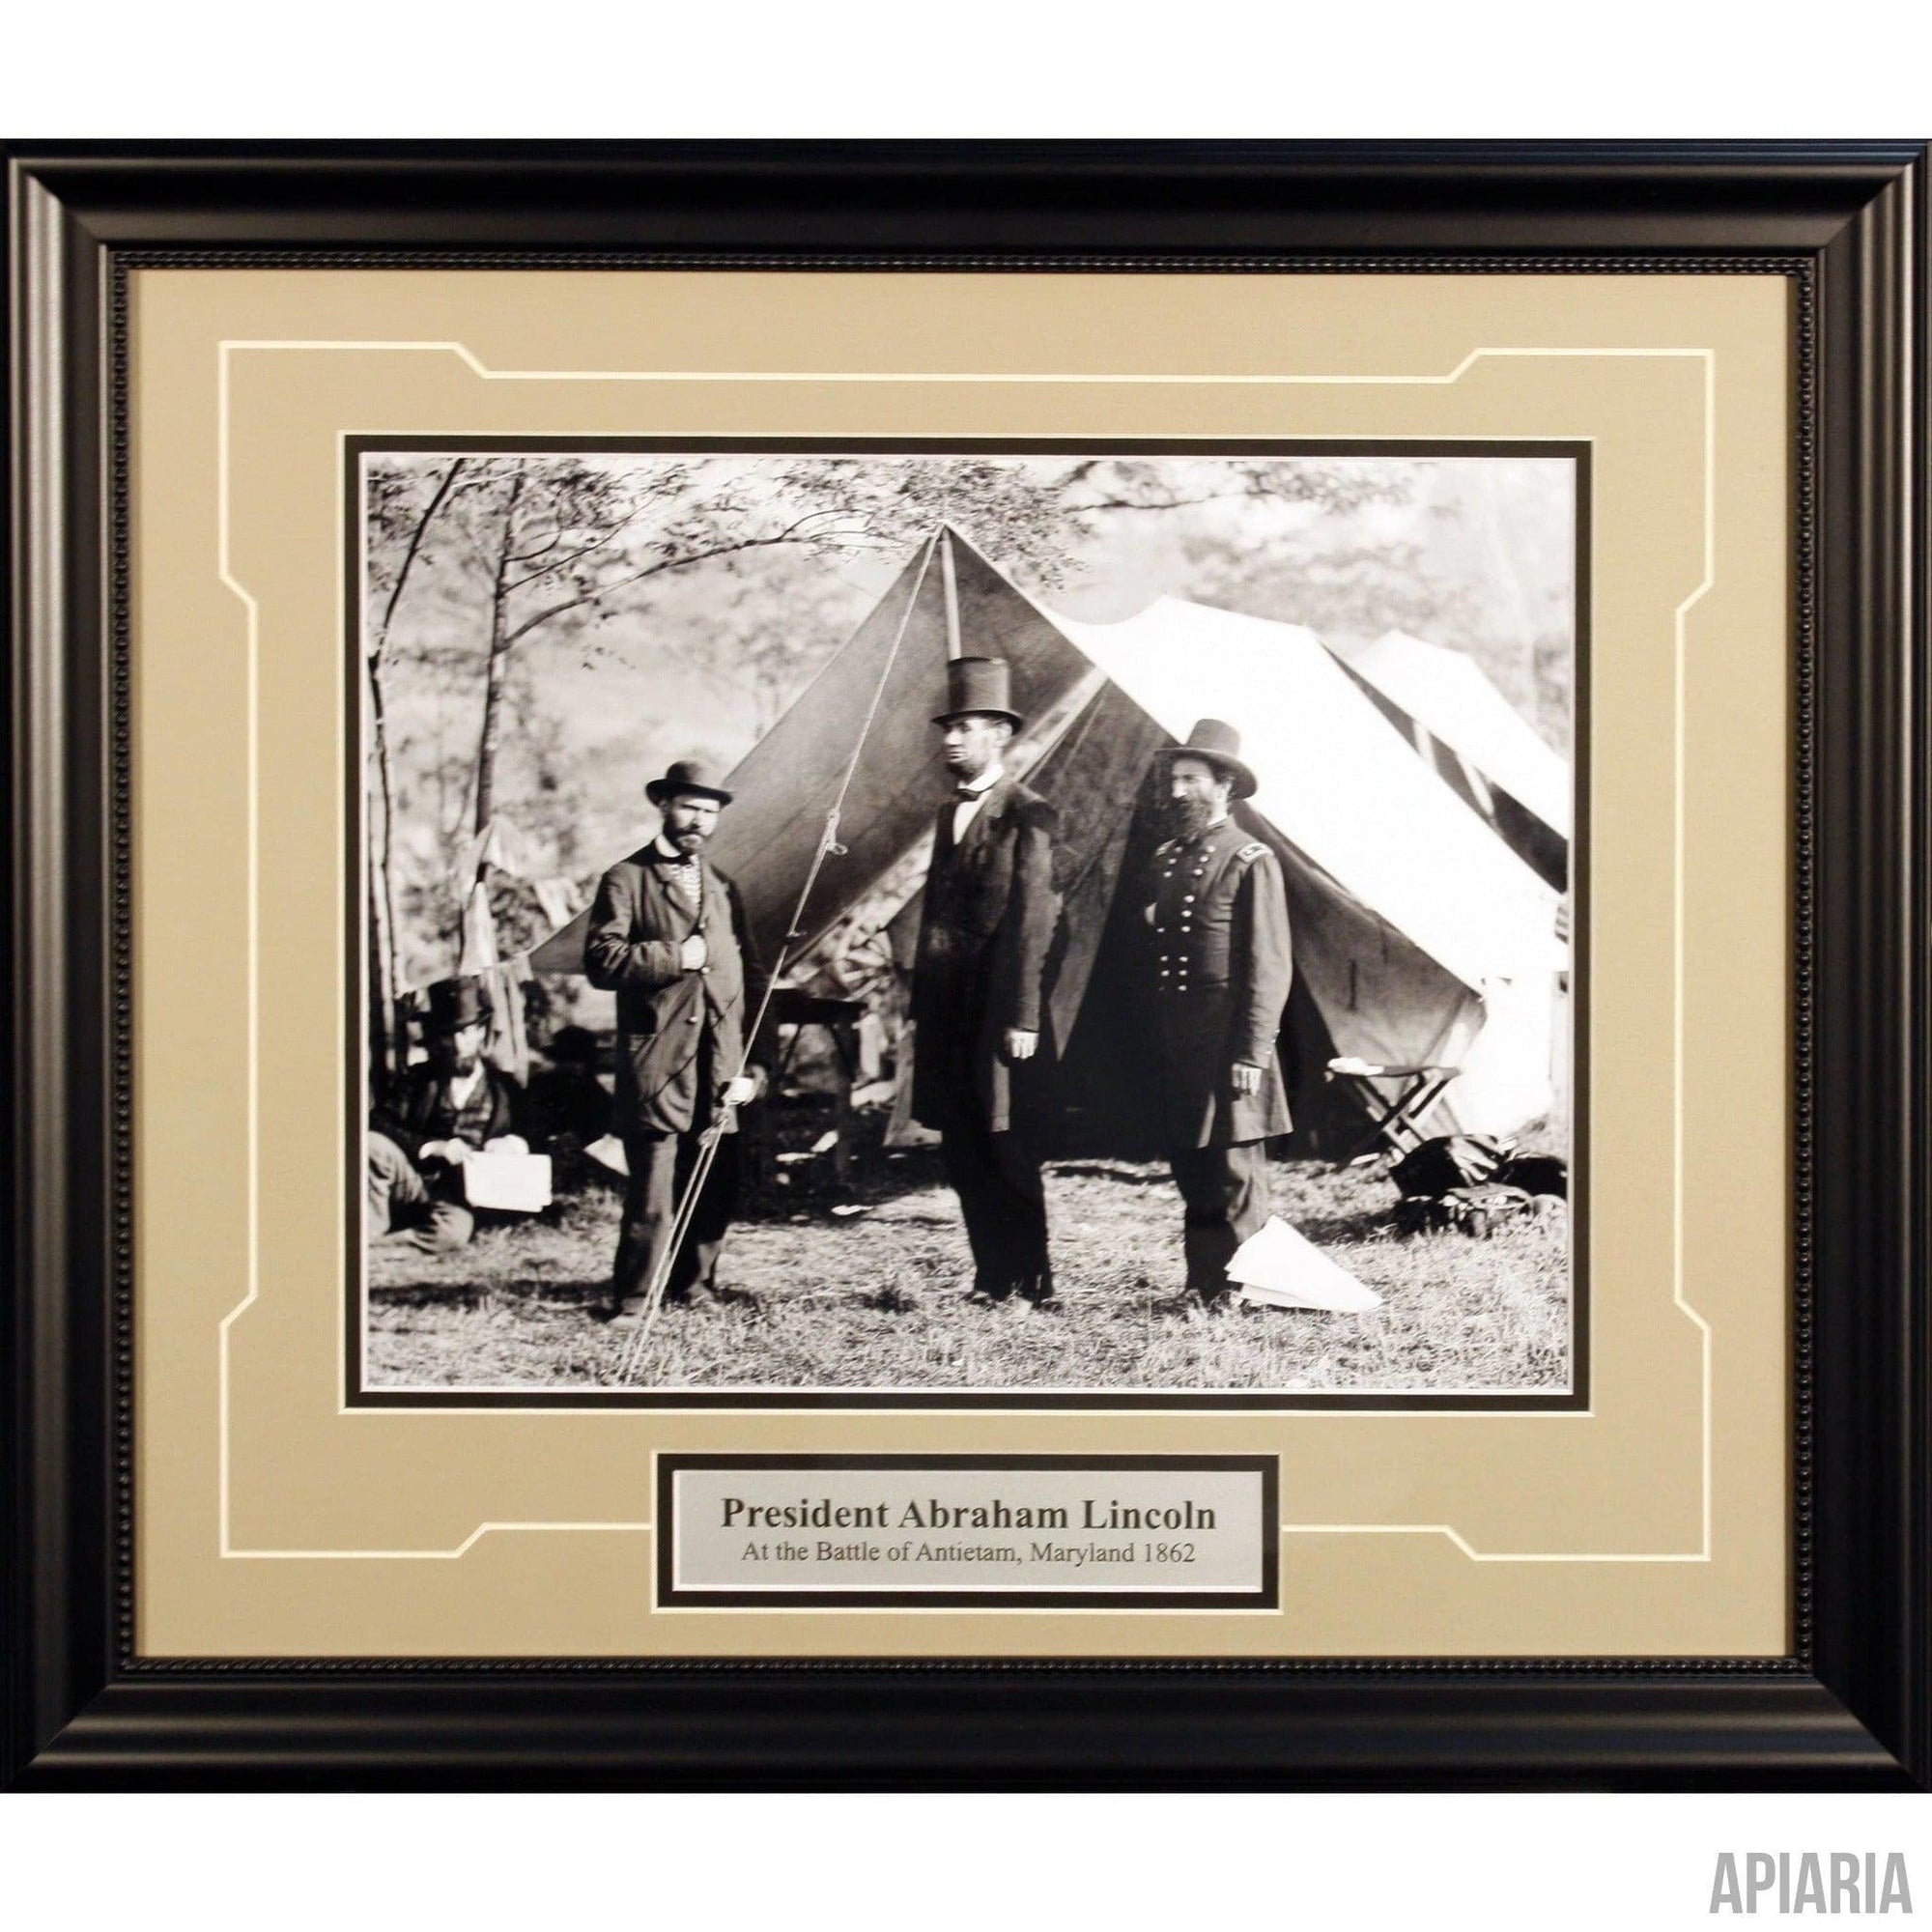 President Lincoln at The Battle of Antietam, 1862-Framed Item-Apiaria